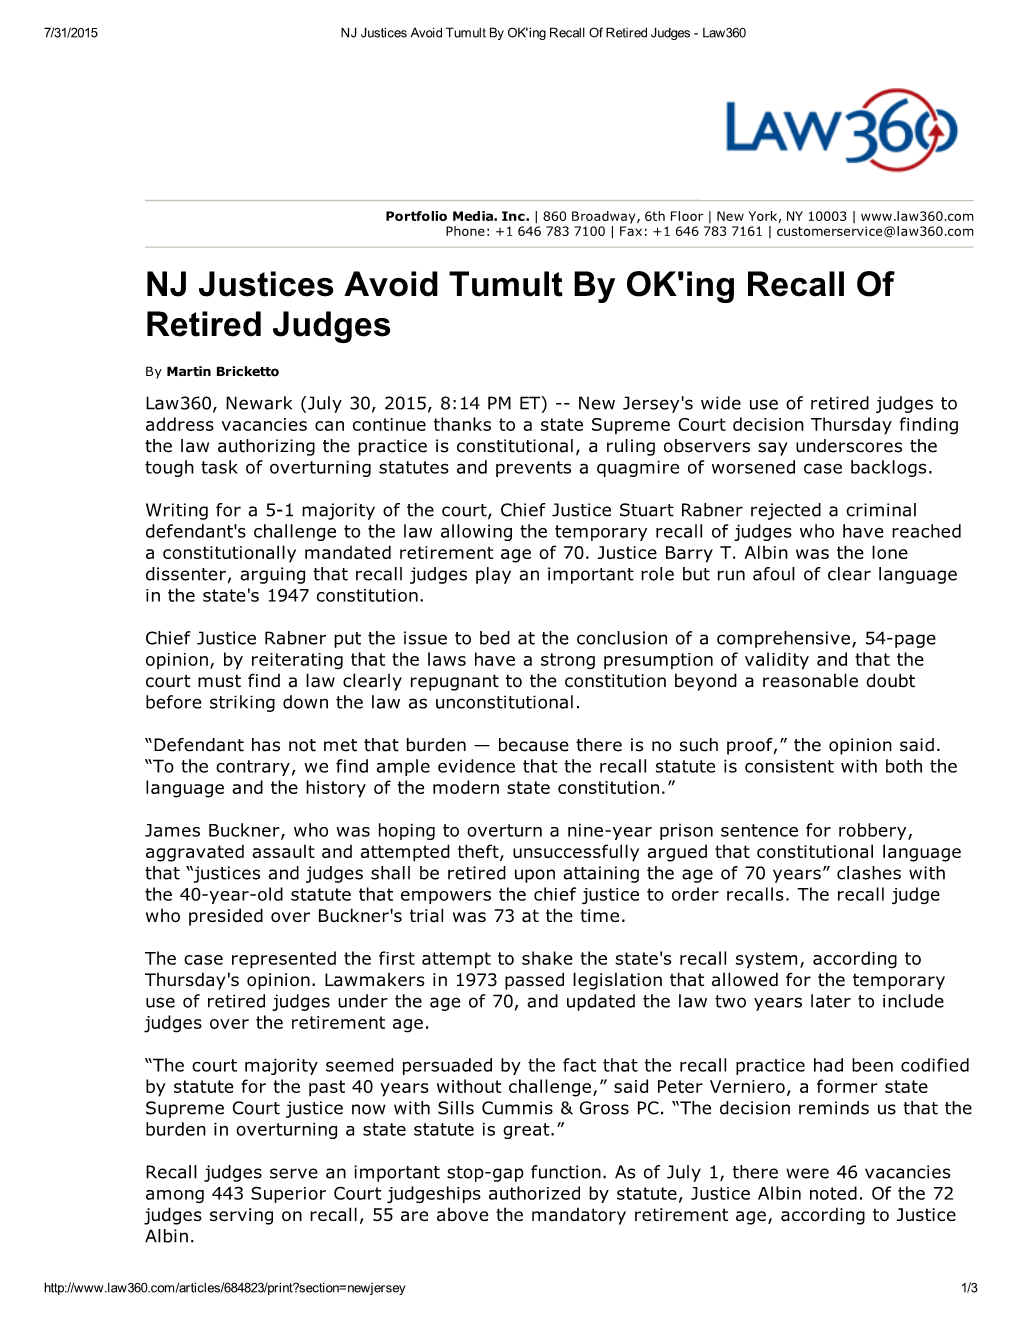 NJ Justices Avoid Tumult by OK'ing Recall of Retired Judges ­ Law360